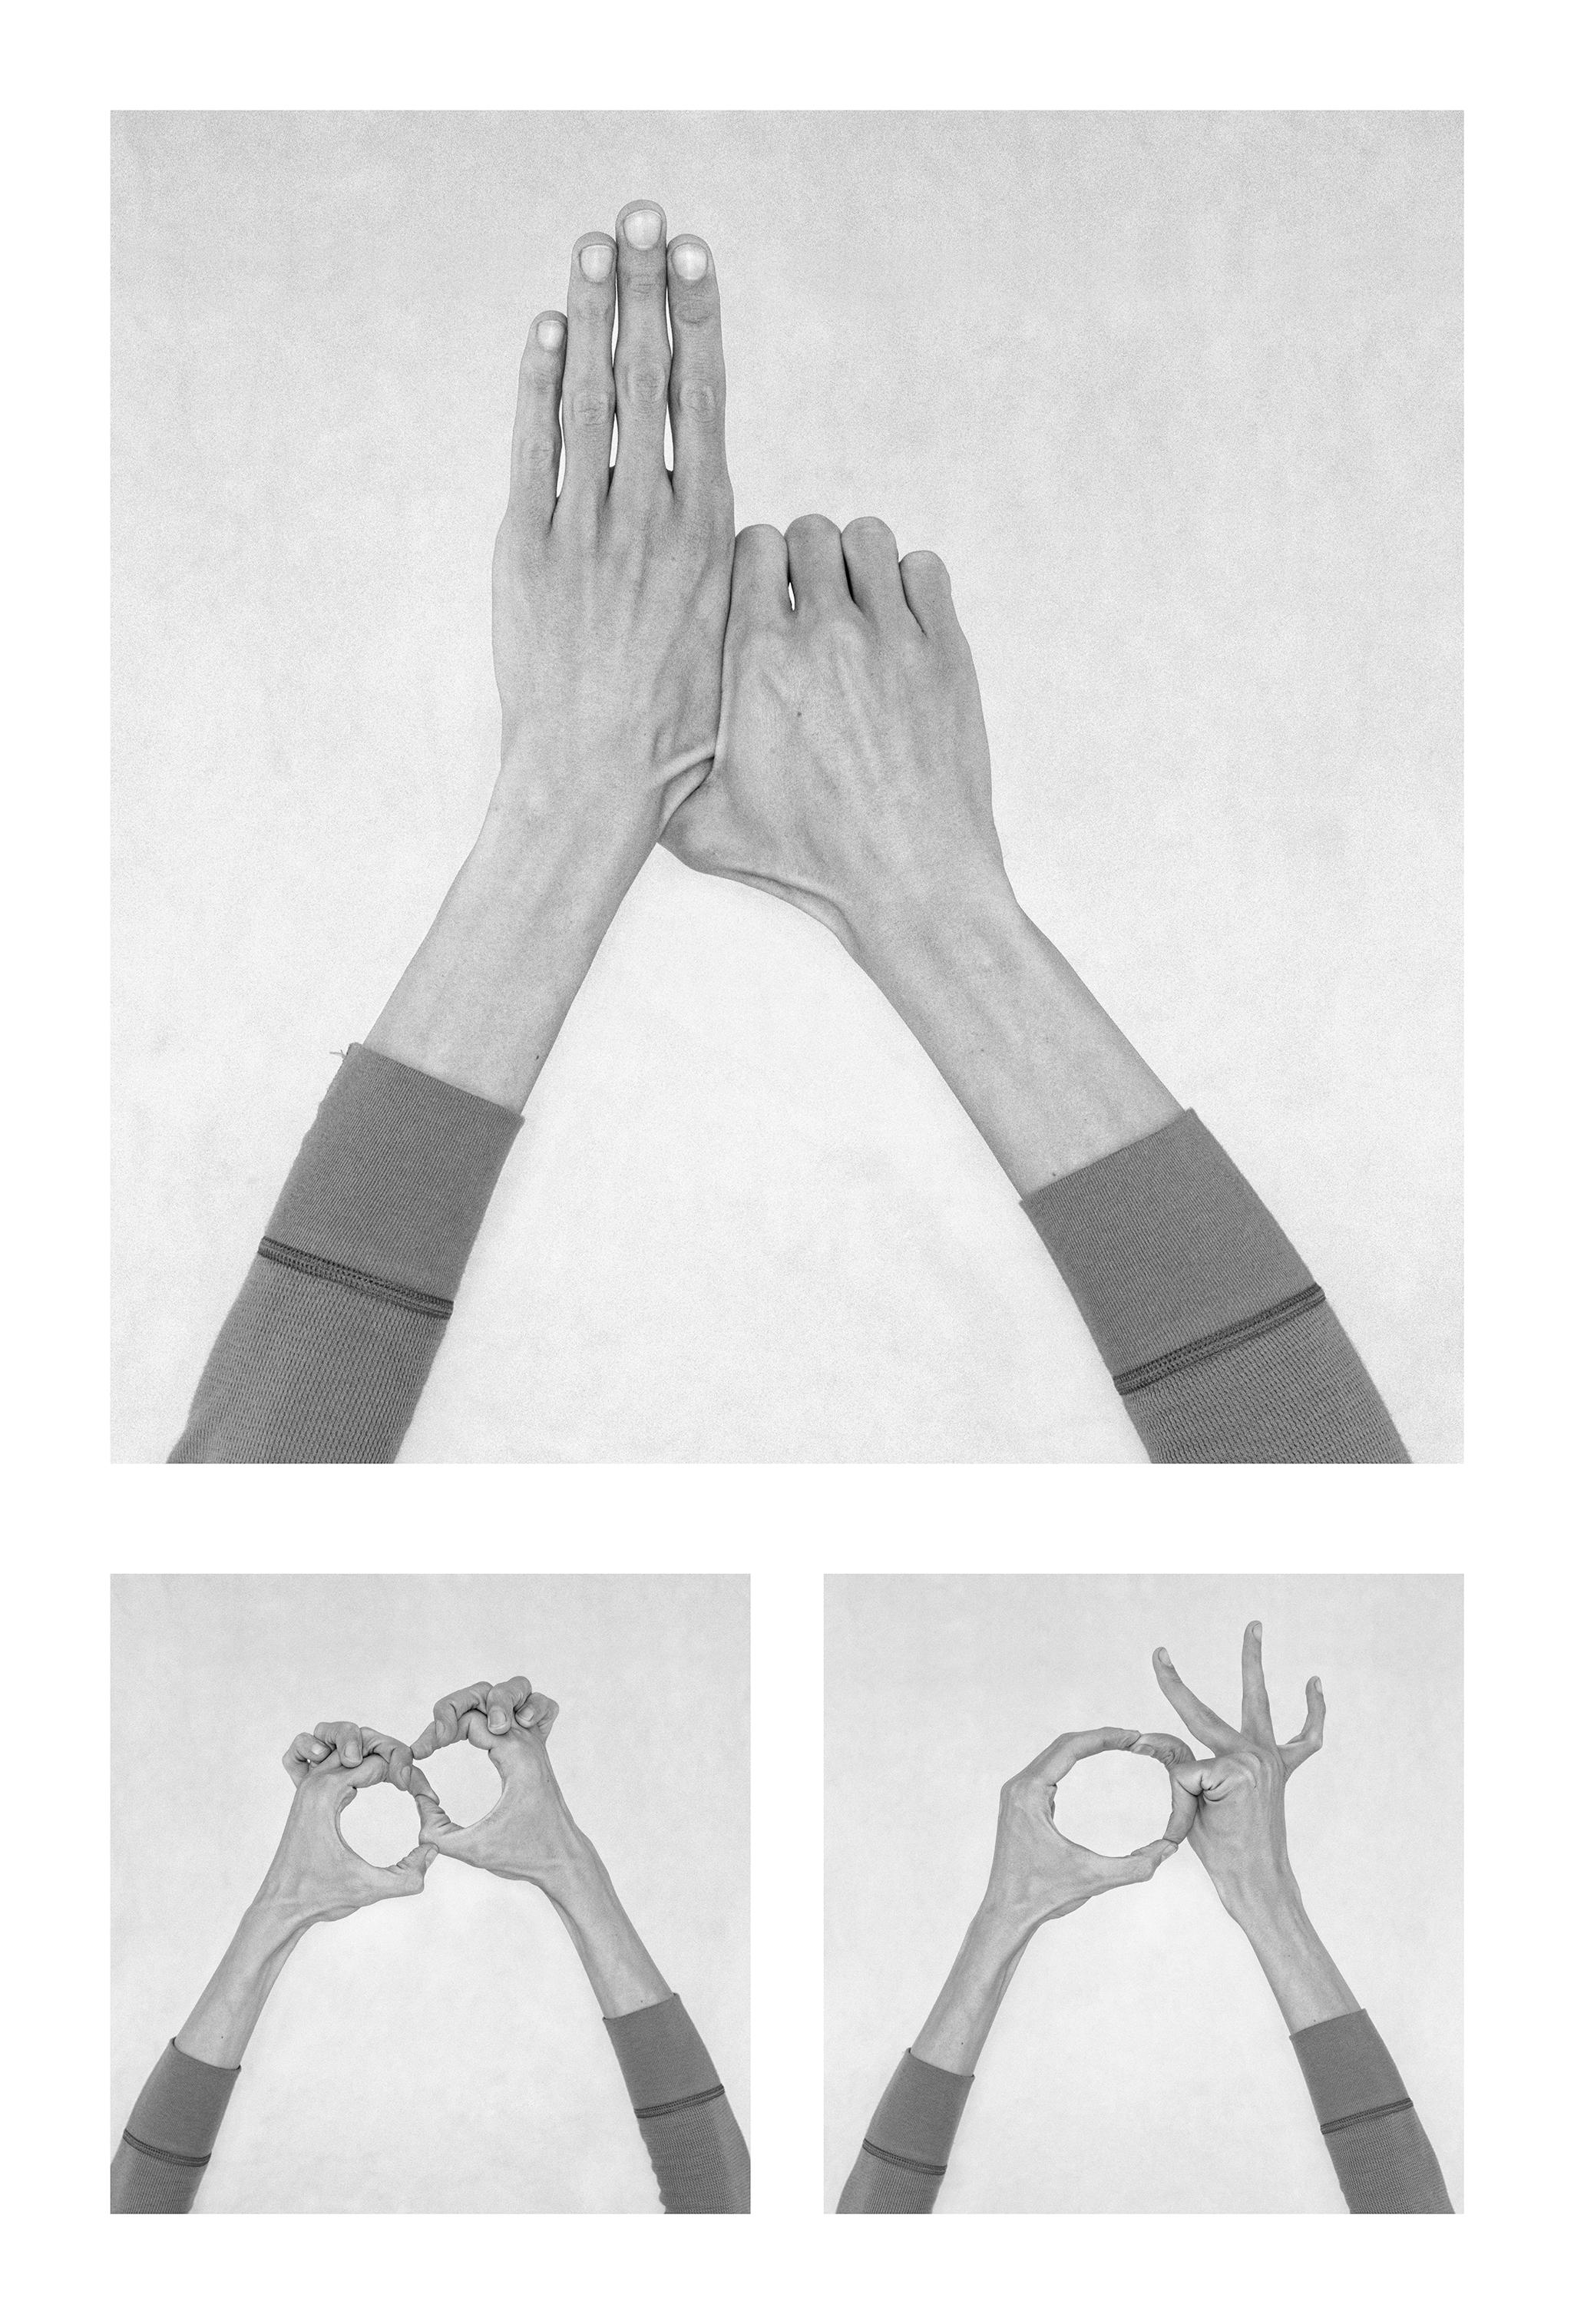 Untitled XXXVIII, XXXIX and Untitled XXXII. Hands. From the Series Chiromorphose